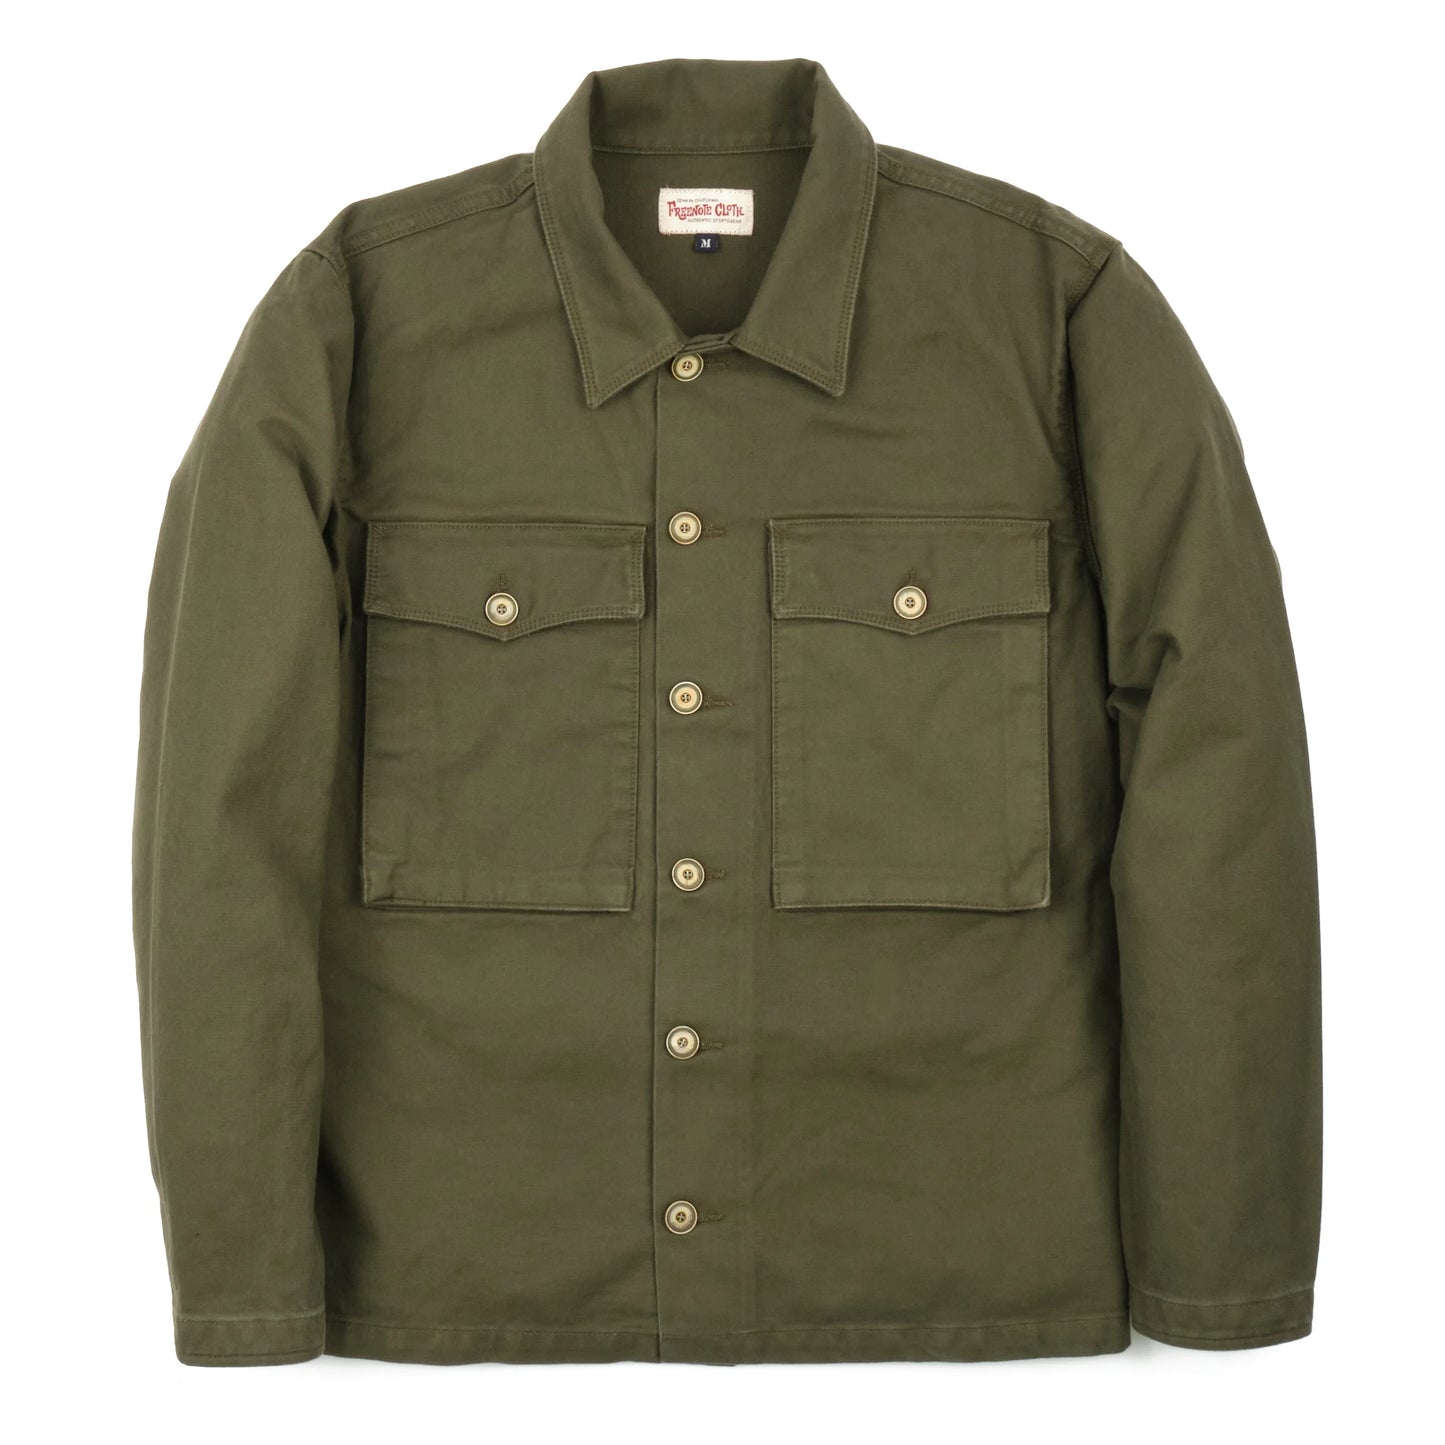 Midway CPO Jacket - Olive